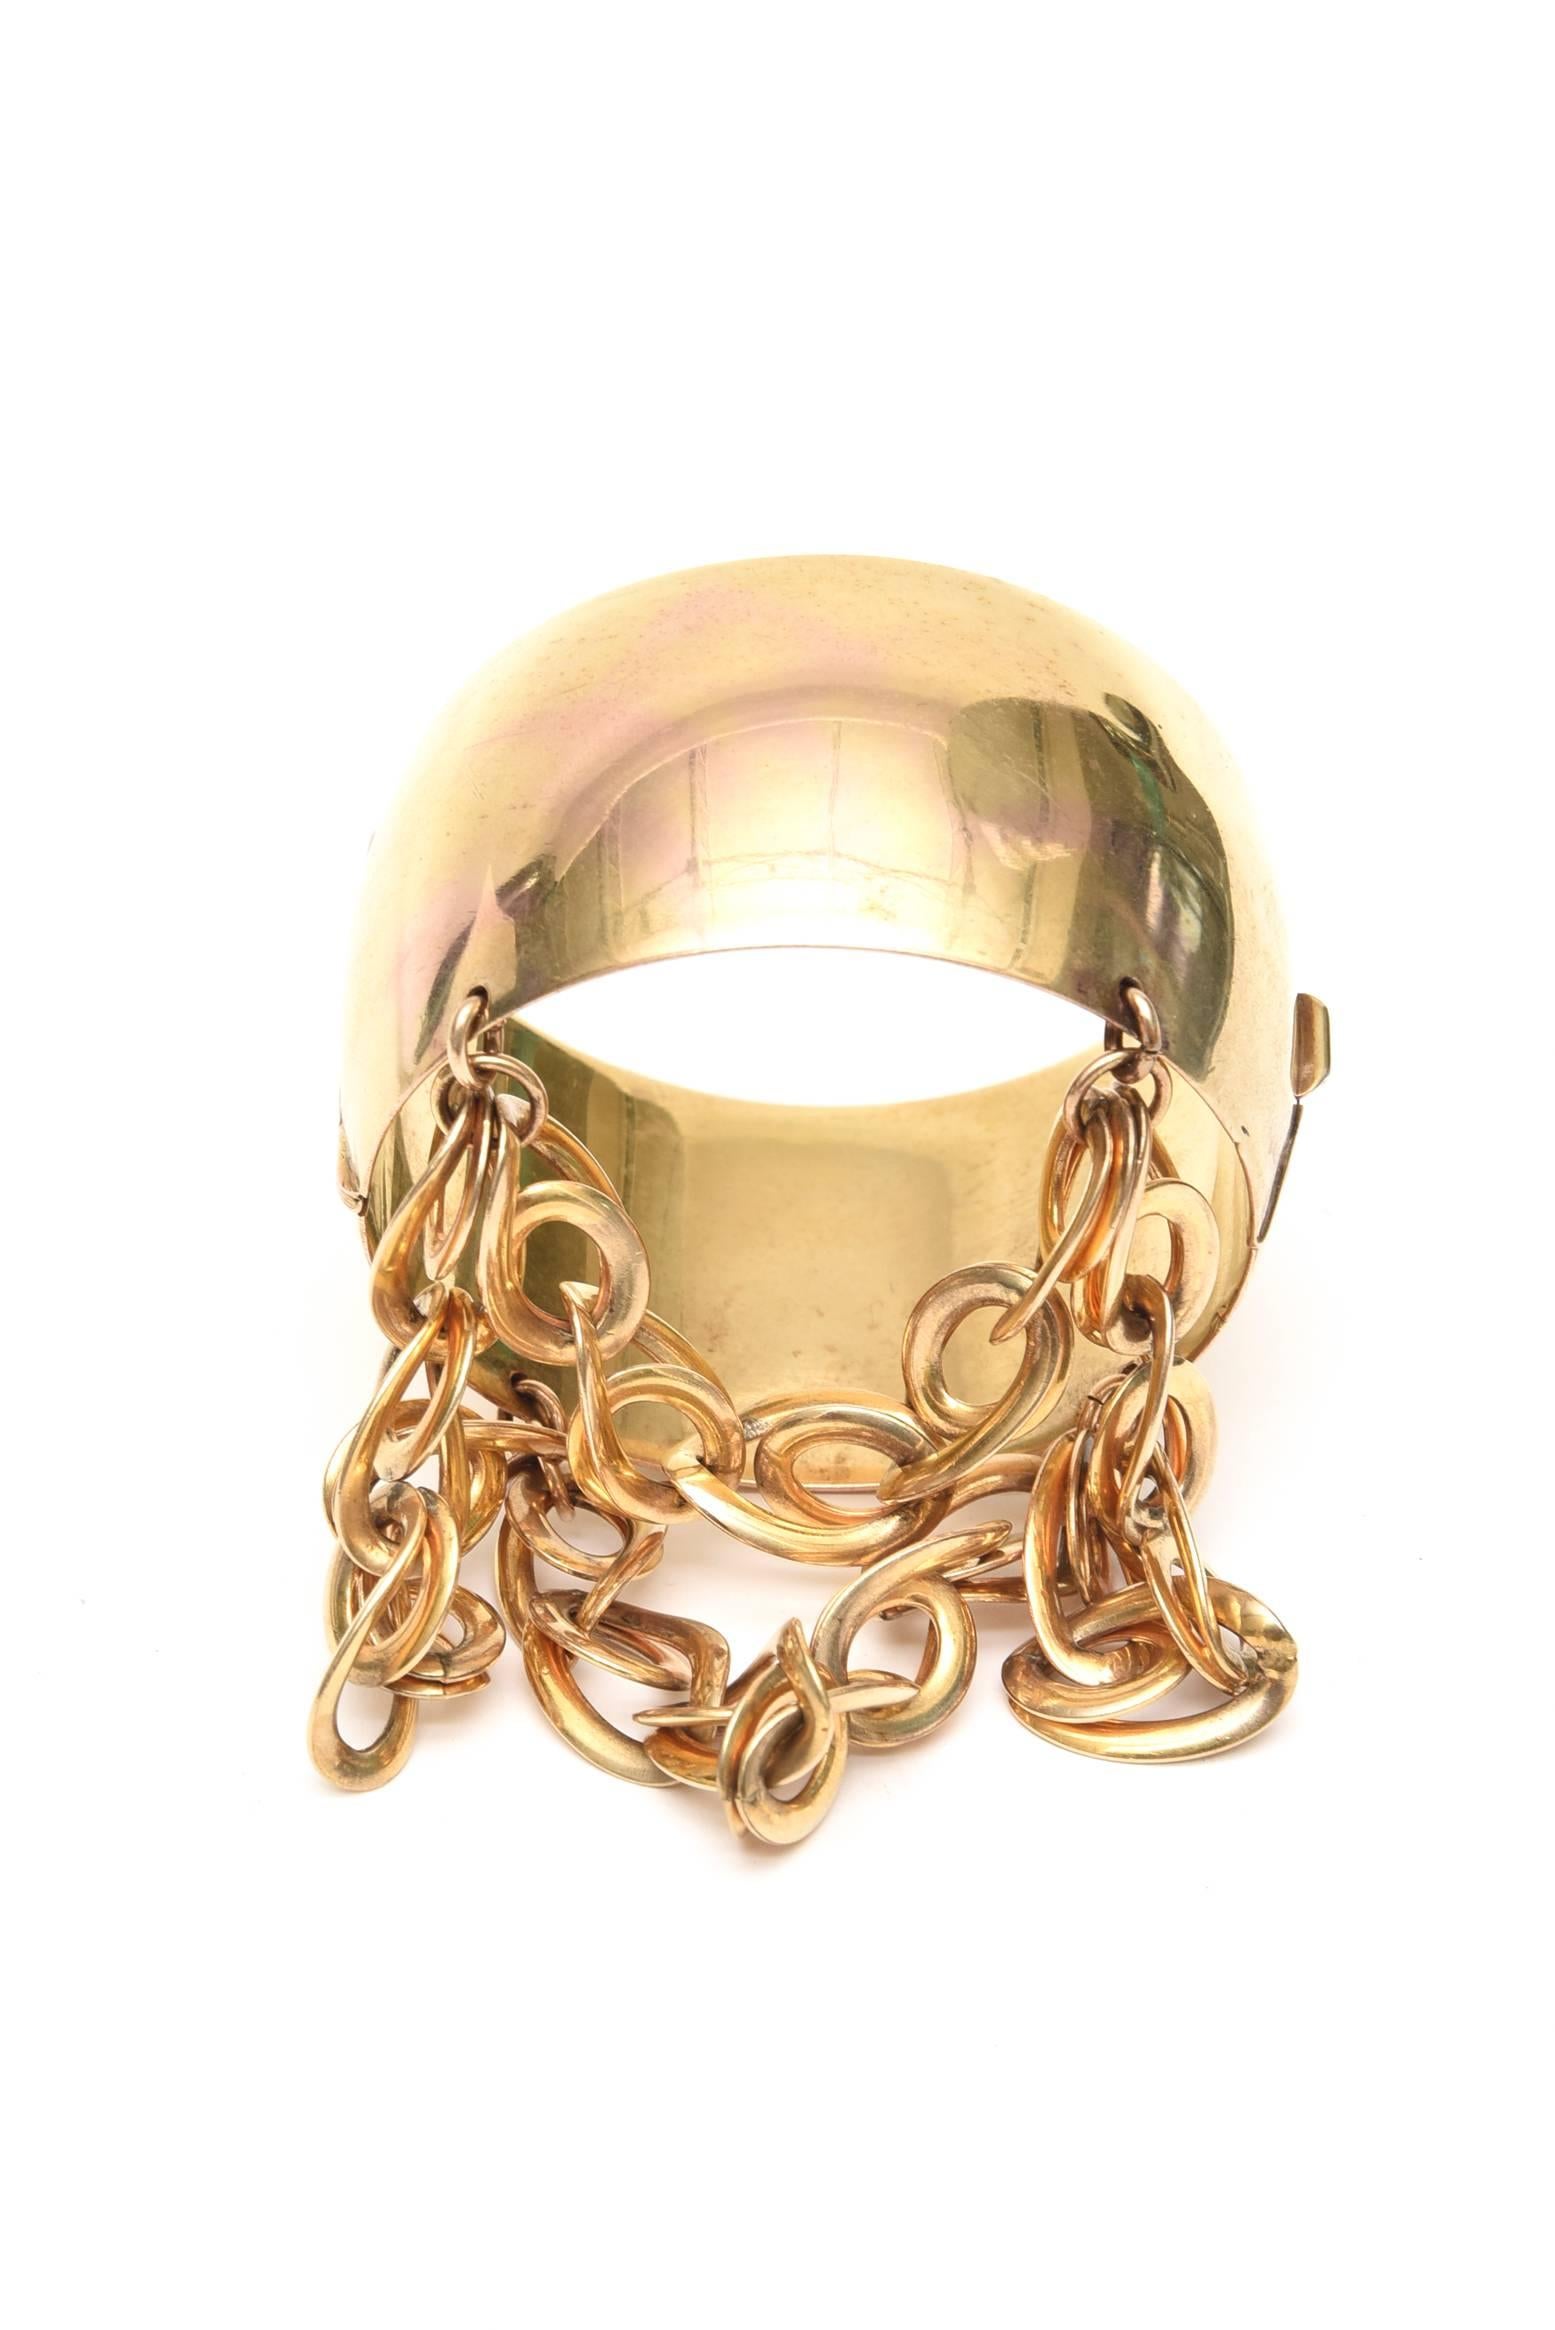 This unusual, chic, thick cuff bracelet w/ dangling link chain is gold wash over sterling silver.  IT IS vermeil.
The chains cascade beautifully on your hand. 
This is an unusual bracelet. It is modern and even rocker style with a more traditional